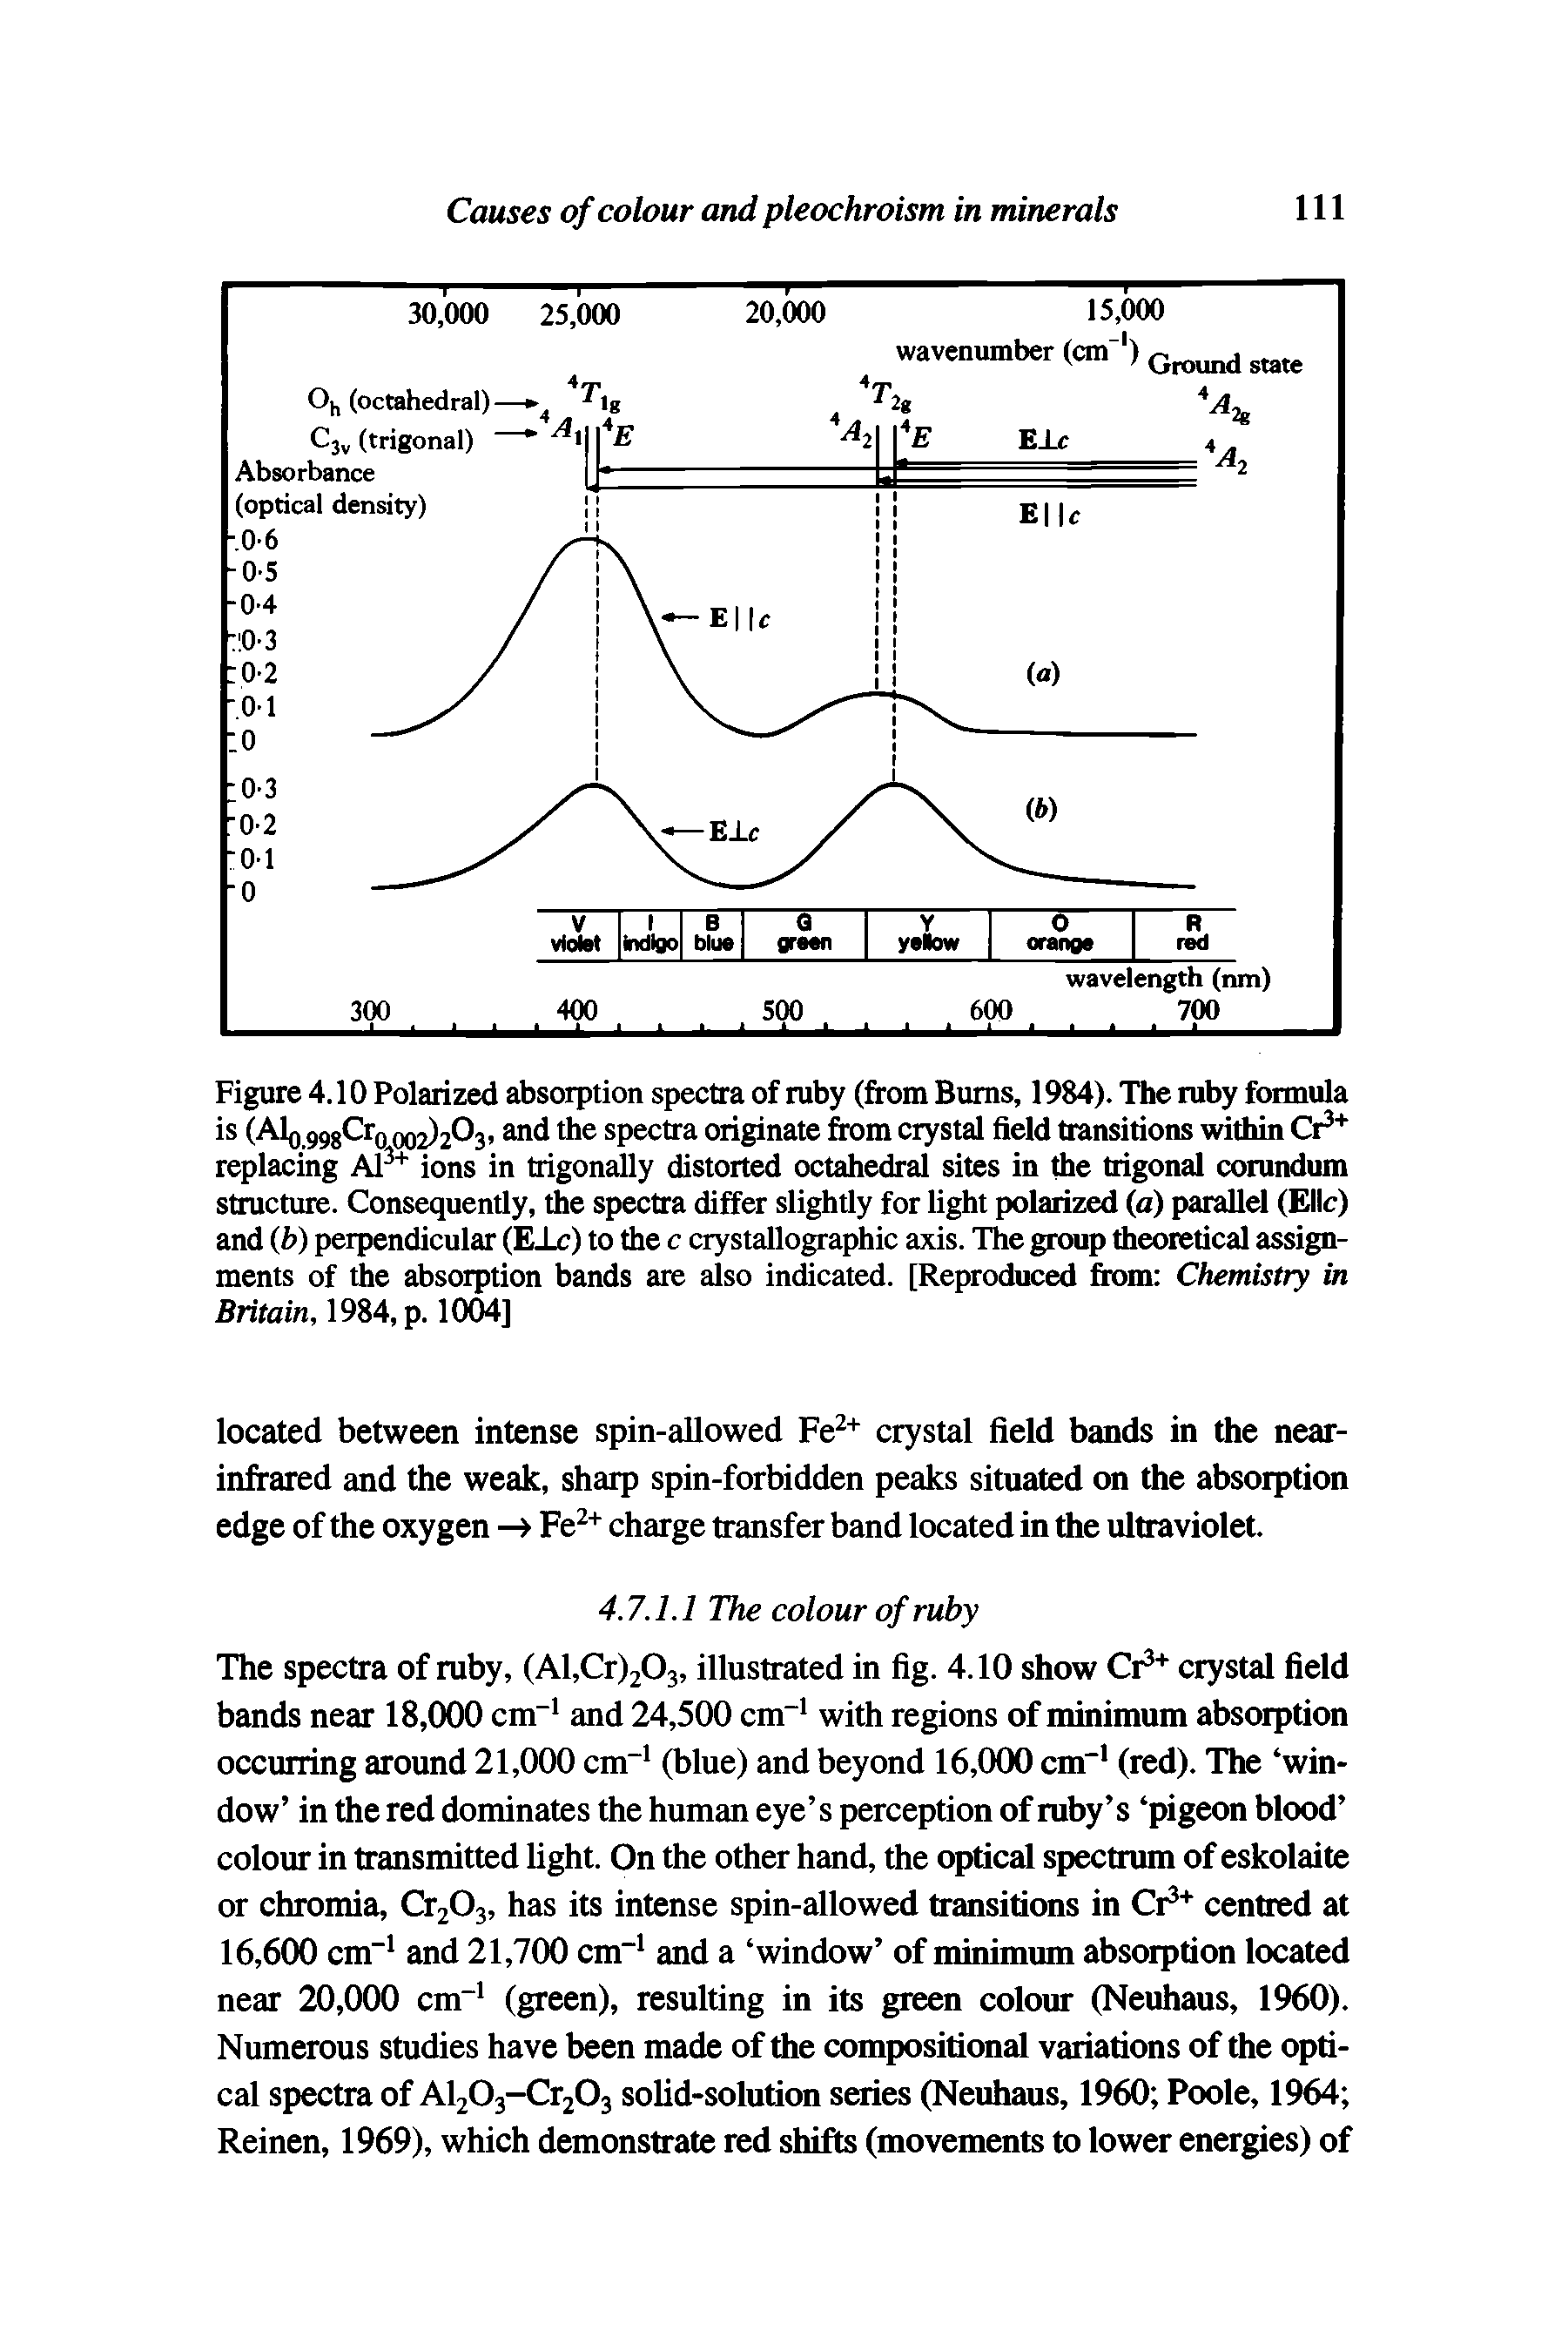 Figure 4.10 Polarized absorption spectra of ruby (from Bums, 1984). The ruby formula is (AIq 99gCr0 002)203, and the spectra originate from crystal field transitions within Cr3+ replacing Al3+ ions in trigonally distorted octahedral sites in the trigonal corundum structure. Consequently, the spectra differ slightly for light polarized (a) parallel (Ellc) and (b) perpendicular (E c) to the c crystallographic axis. The group theoretical assignments of the absorption bands are also indicated. [Reproduced from Chemistry in Britain, 1984, p. 1004]...